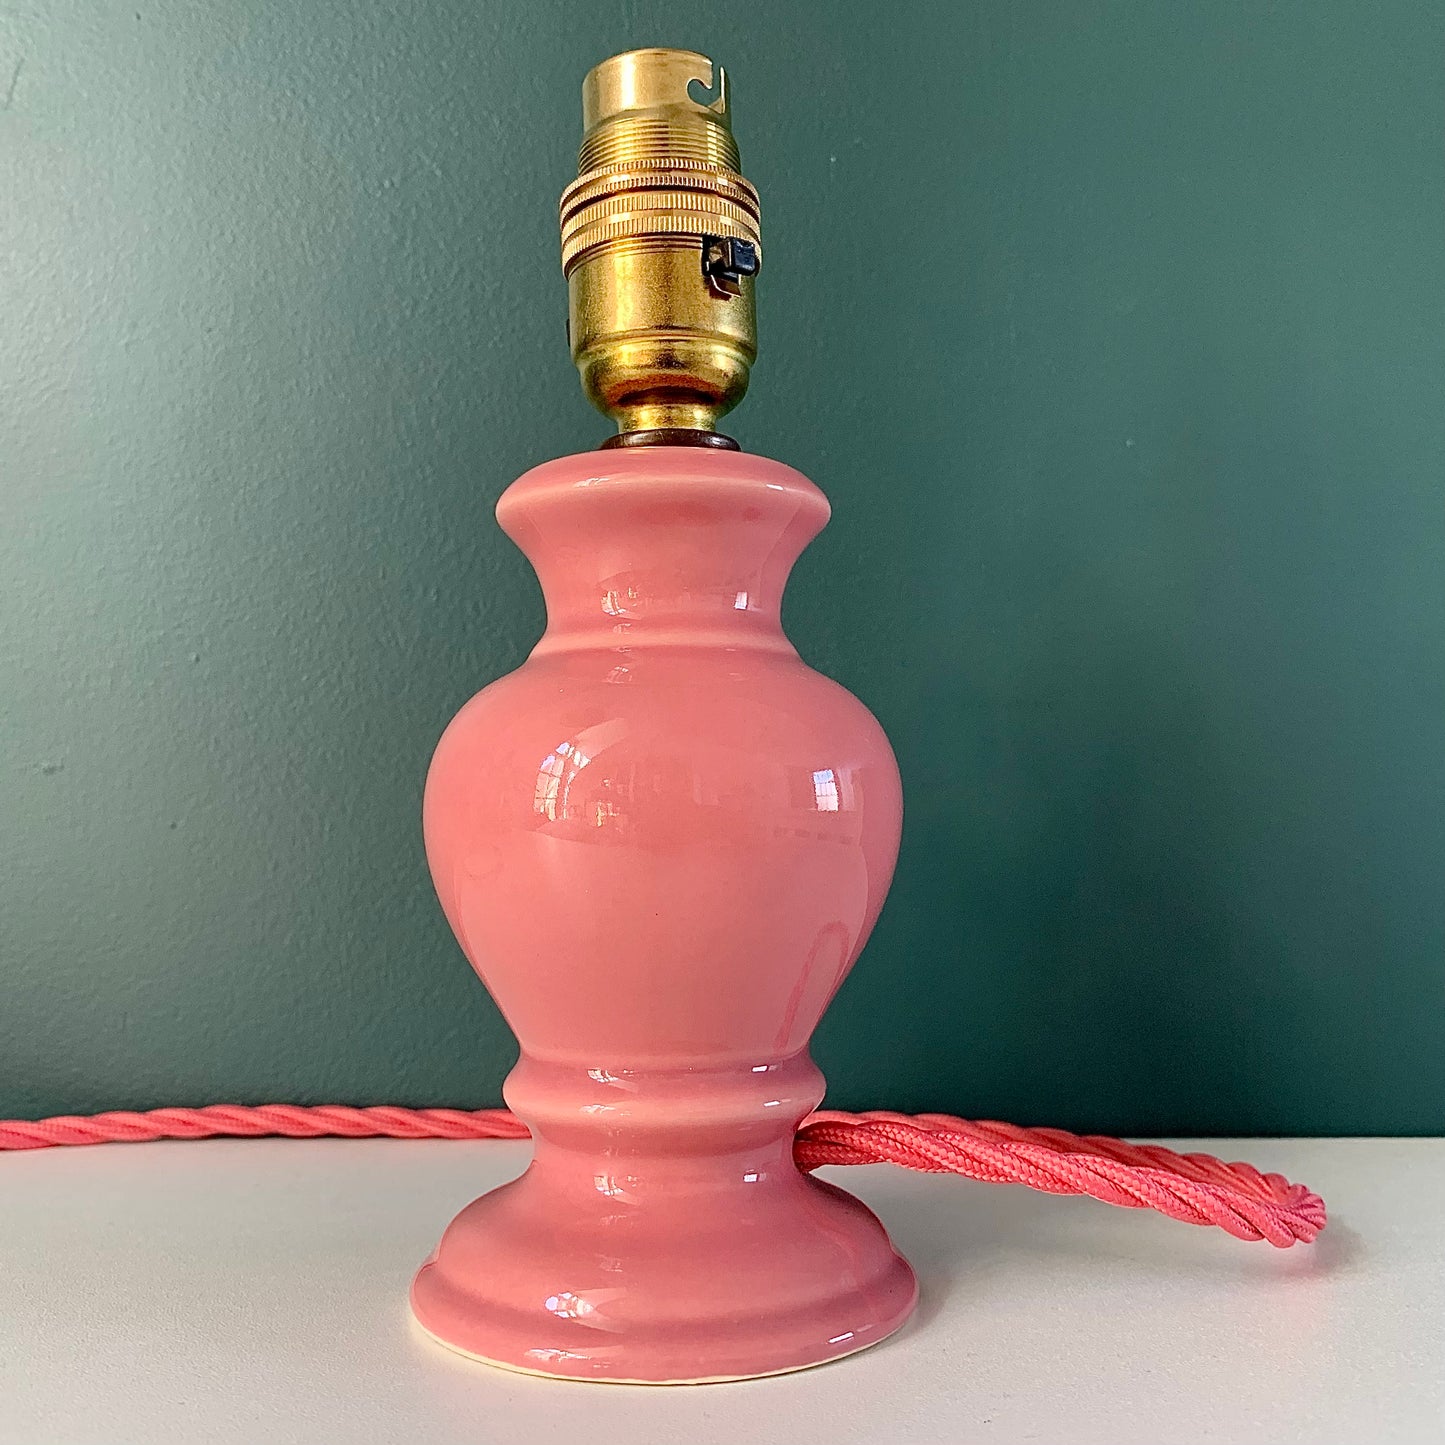 Vintage British English Pink Ceramic Table Lamp 1970s 1980s Staffordshire Pottery